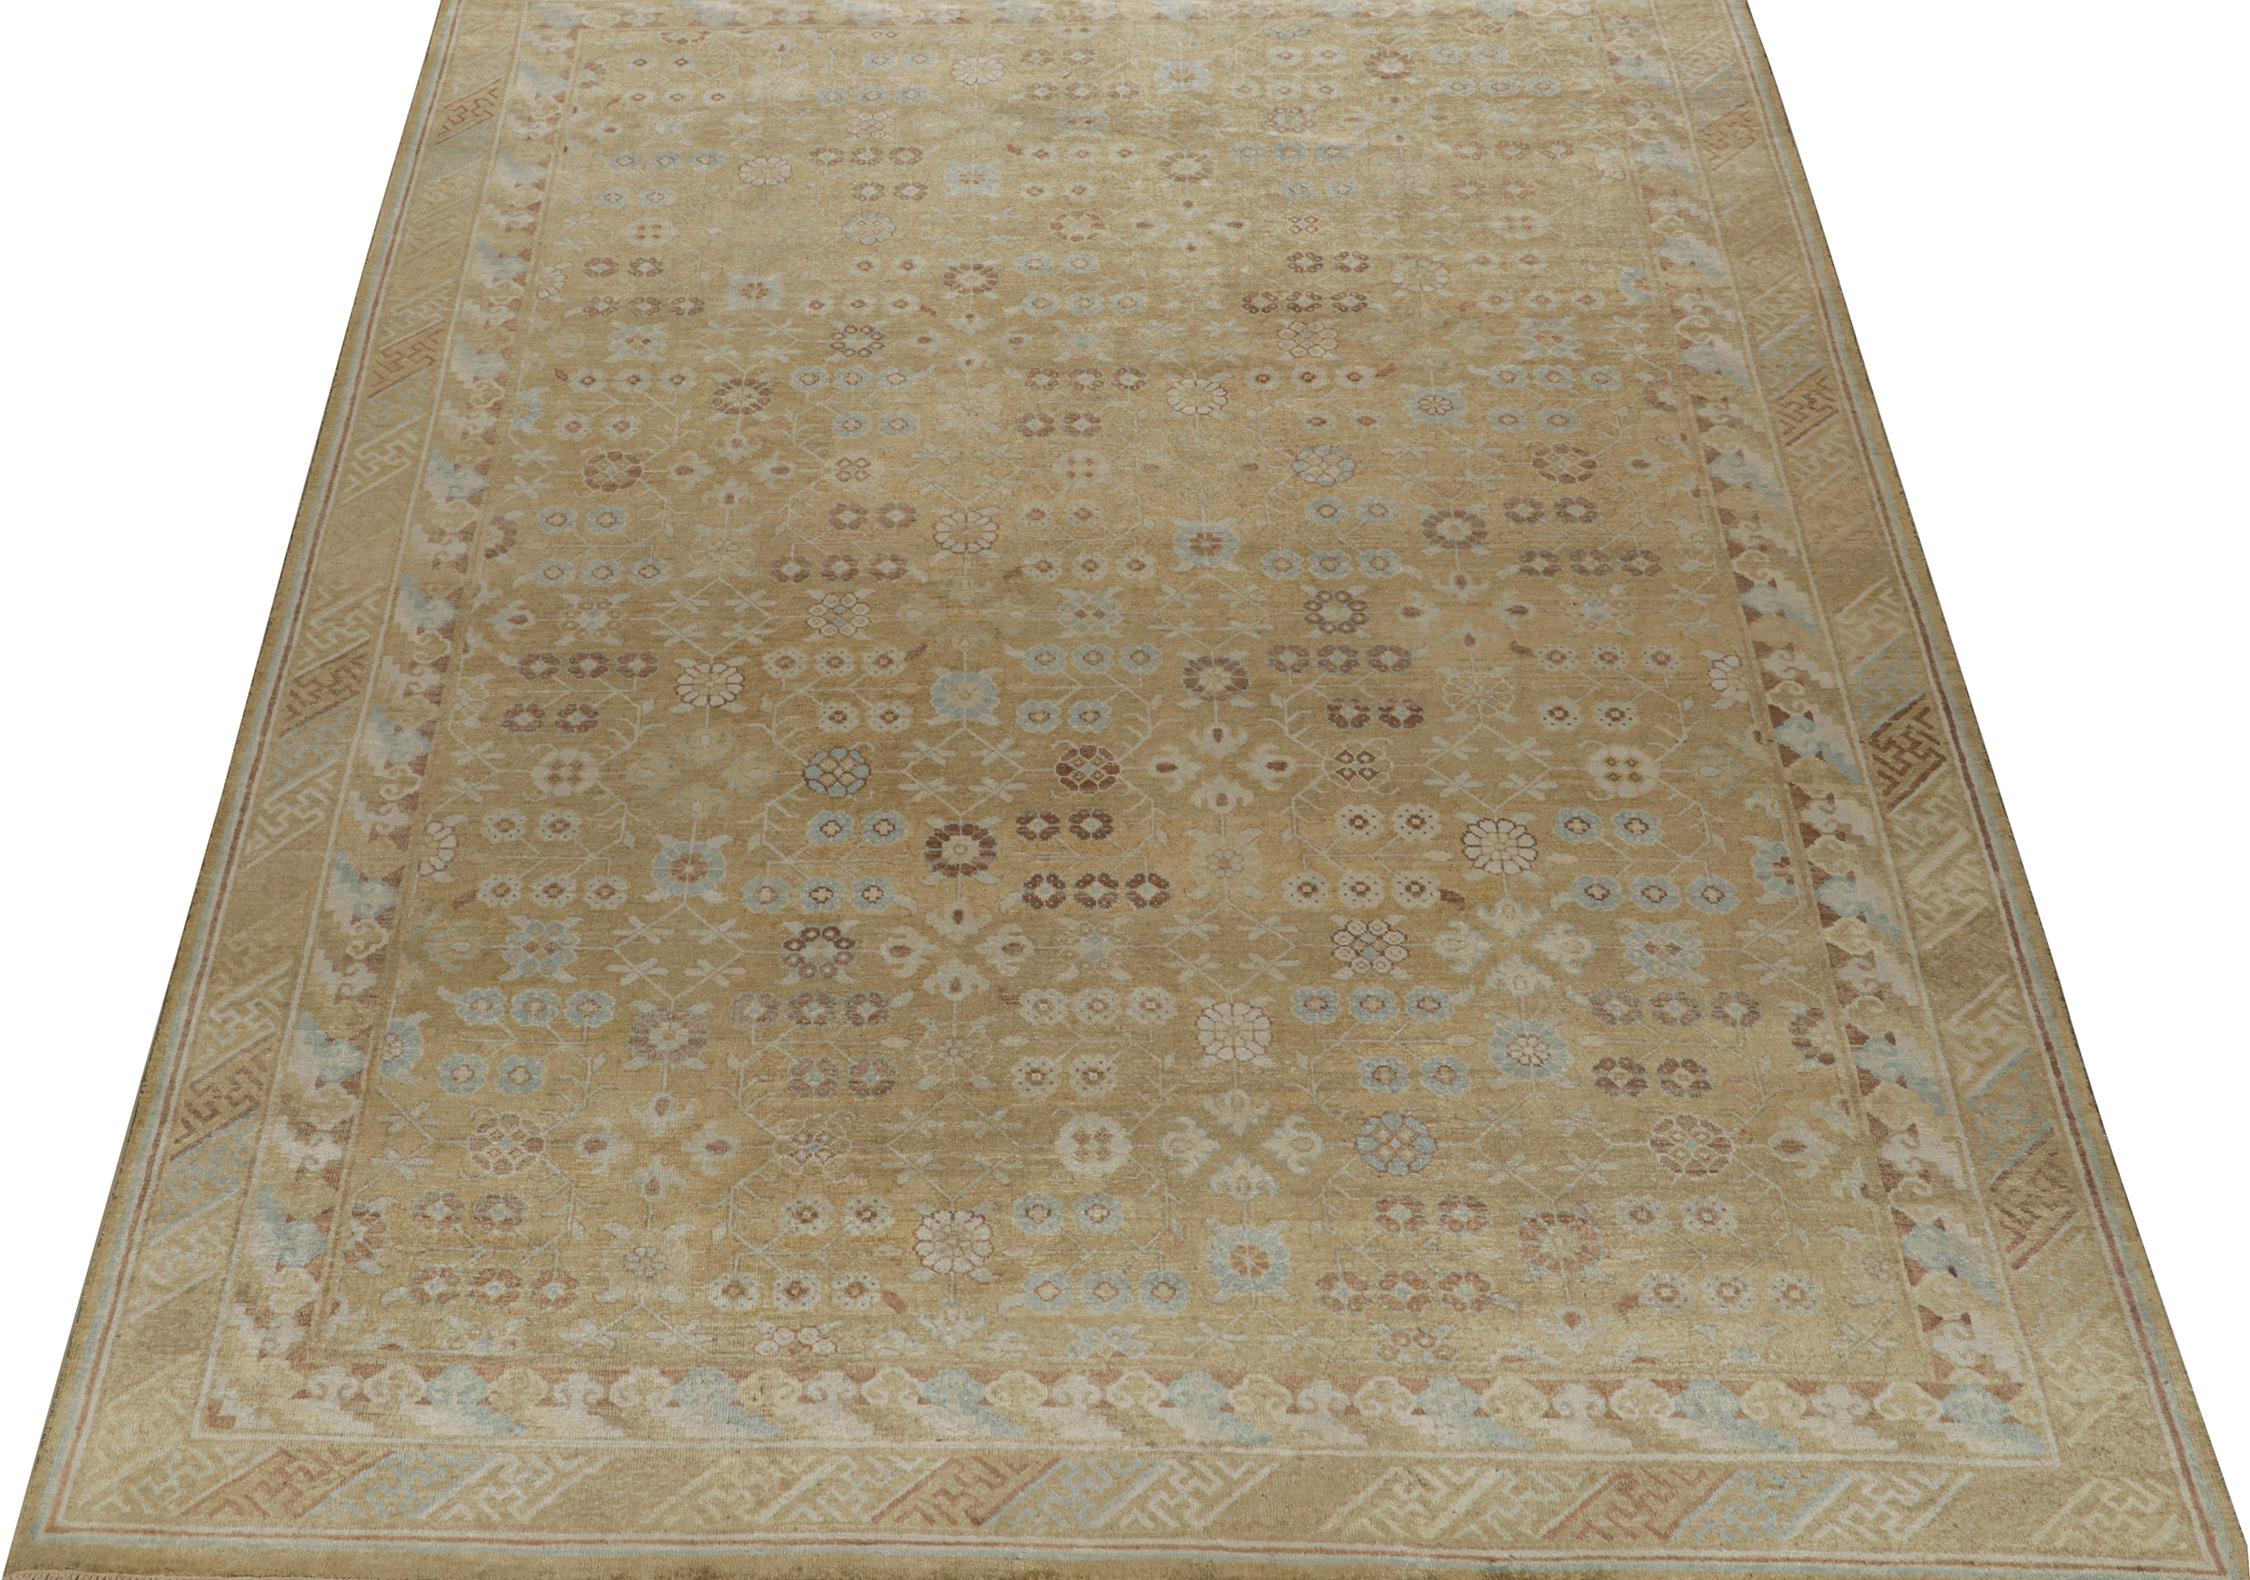 Indian Rug & Kilim’s Khotan Style Rug with Blue & Beige-Brown Geometric Pattern For Sale